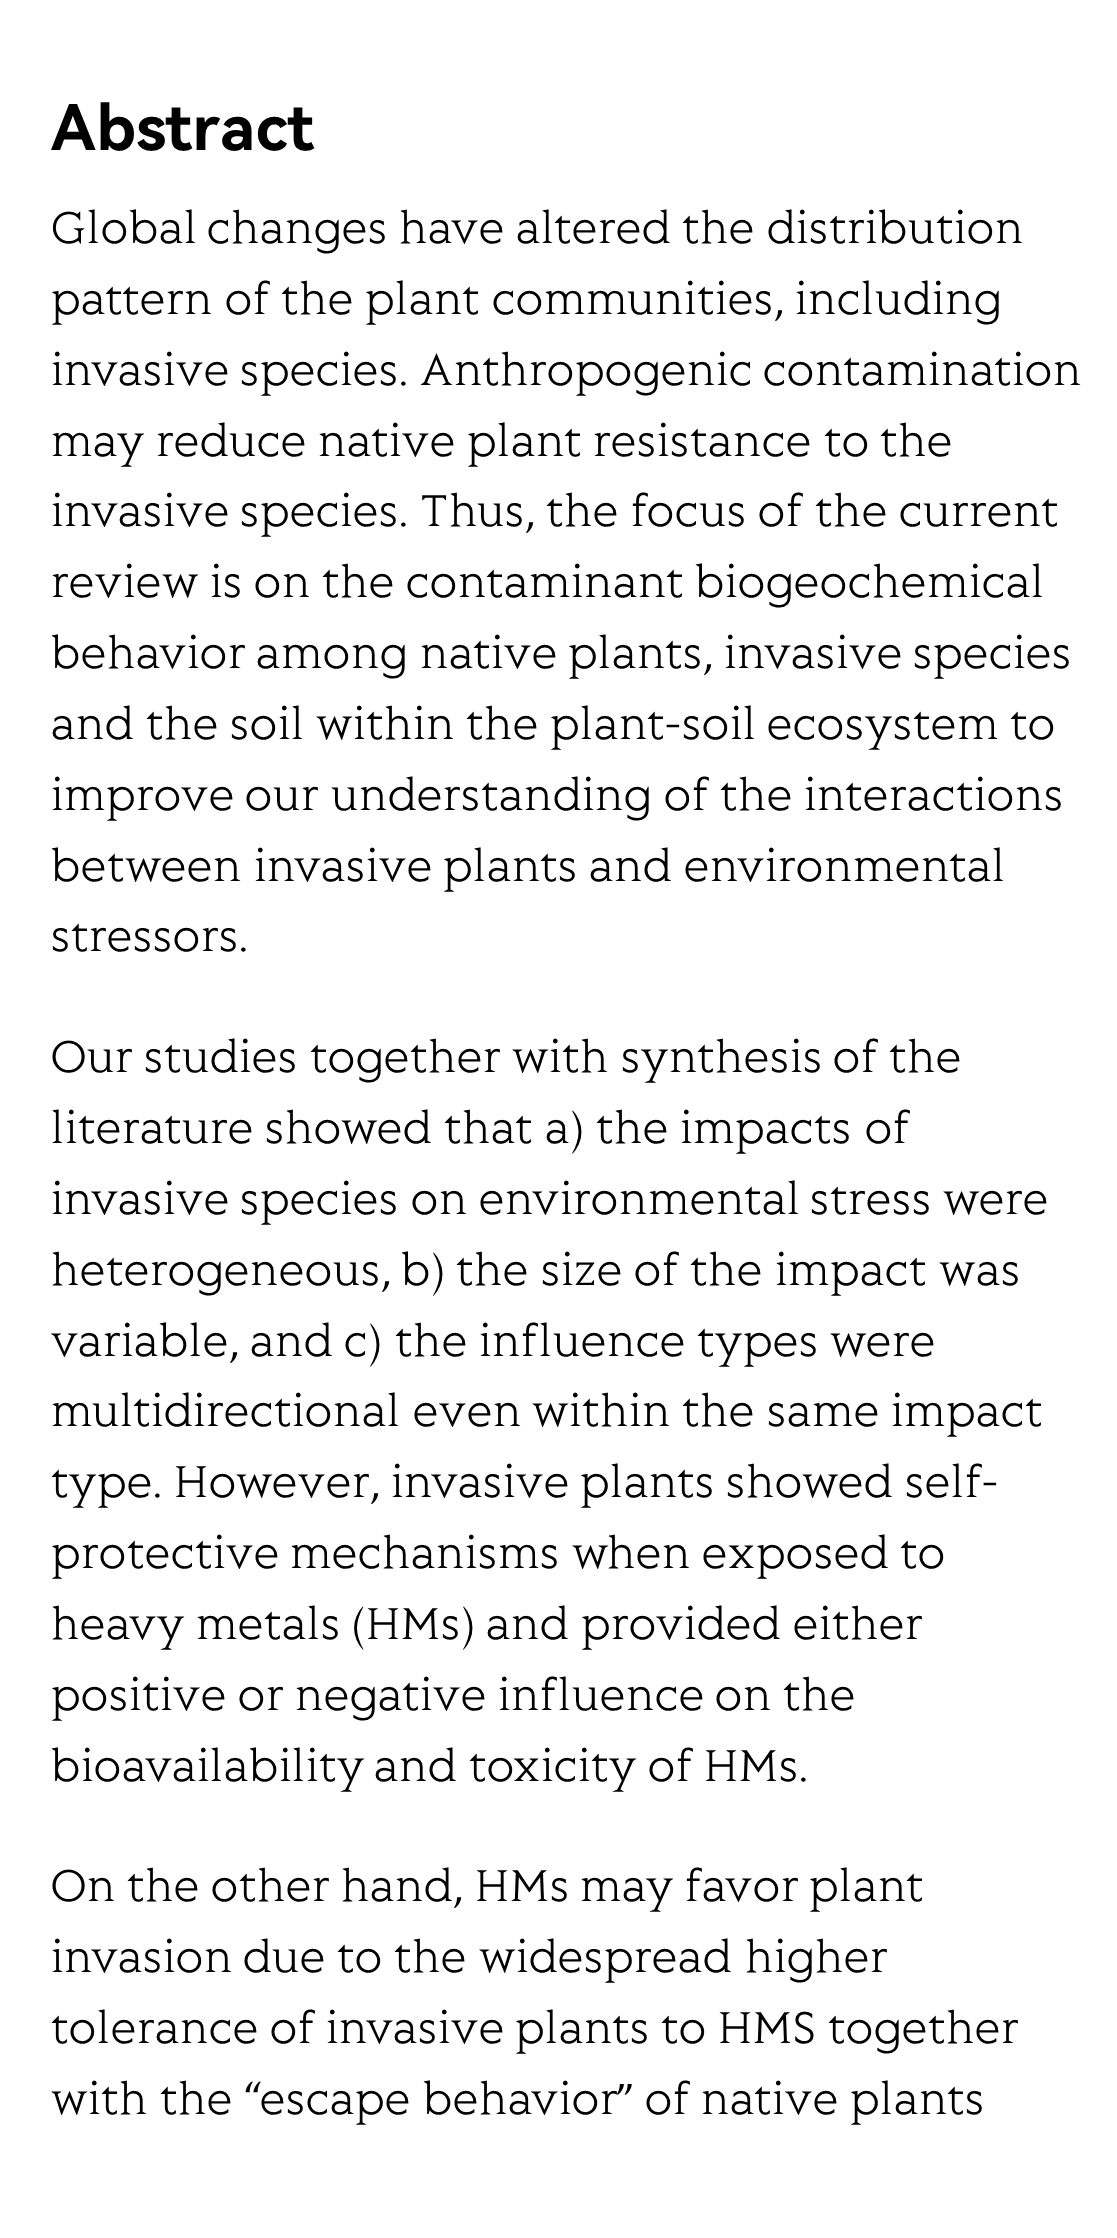 Interactions between invasive plants and heavy metal stresses: a review_2